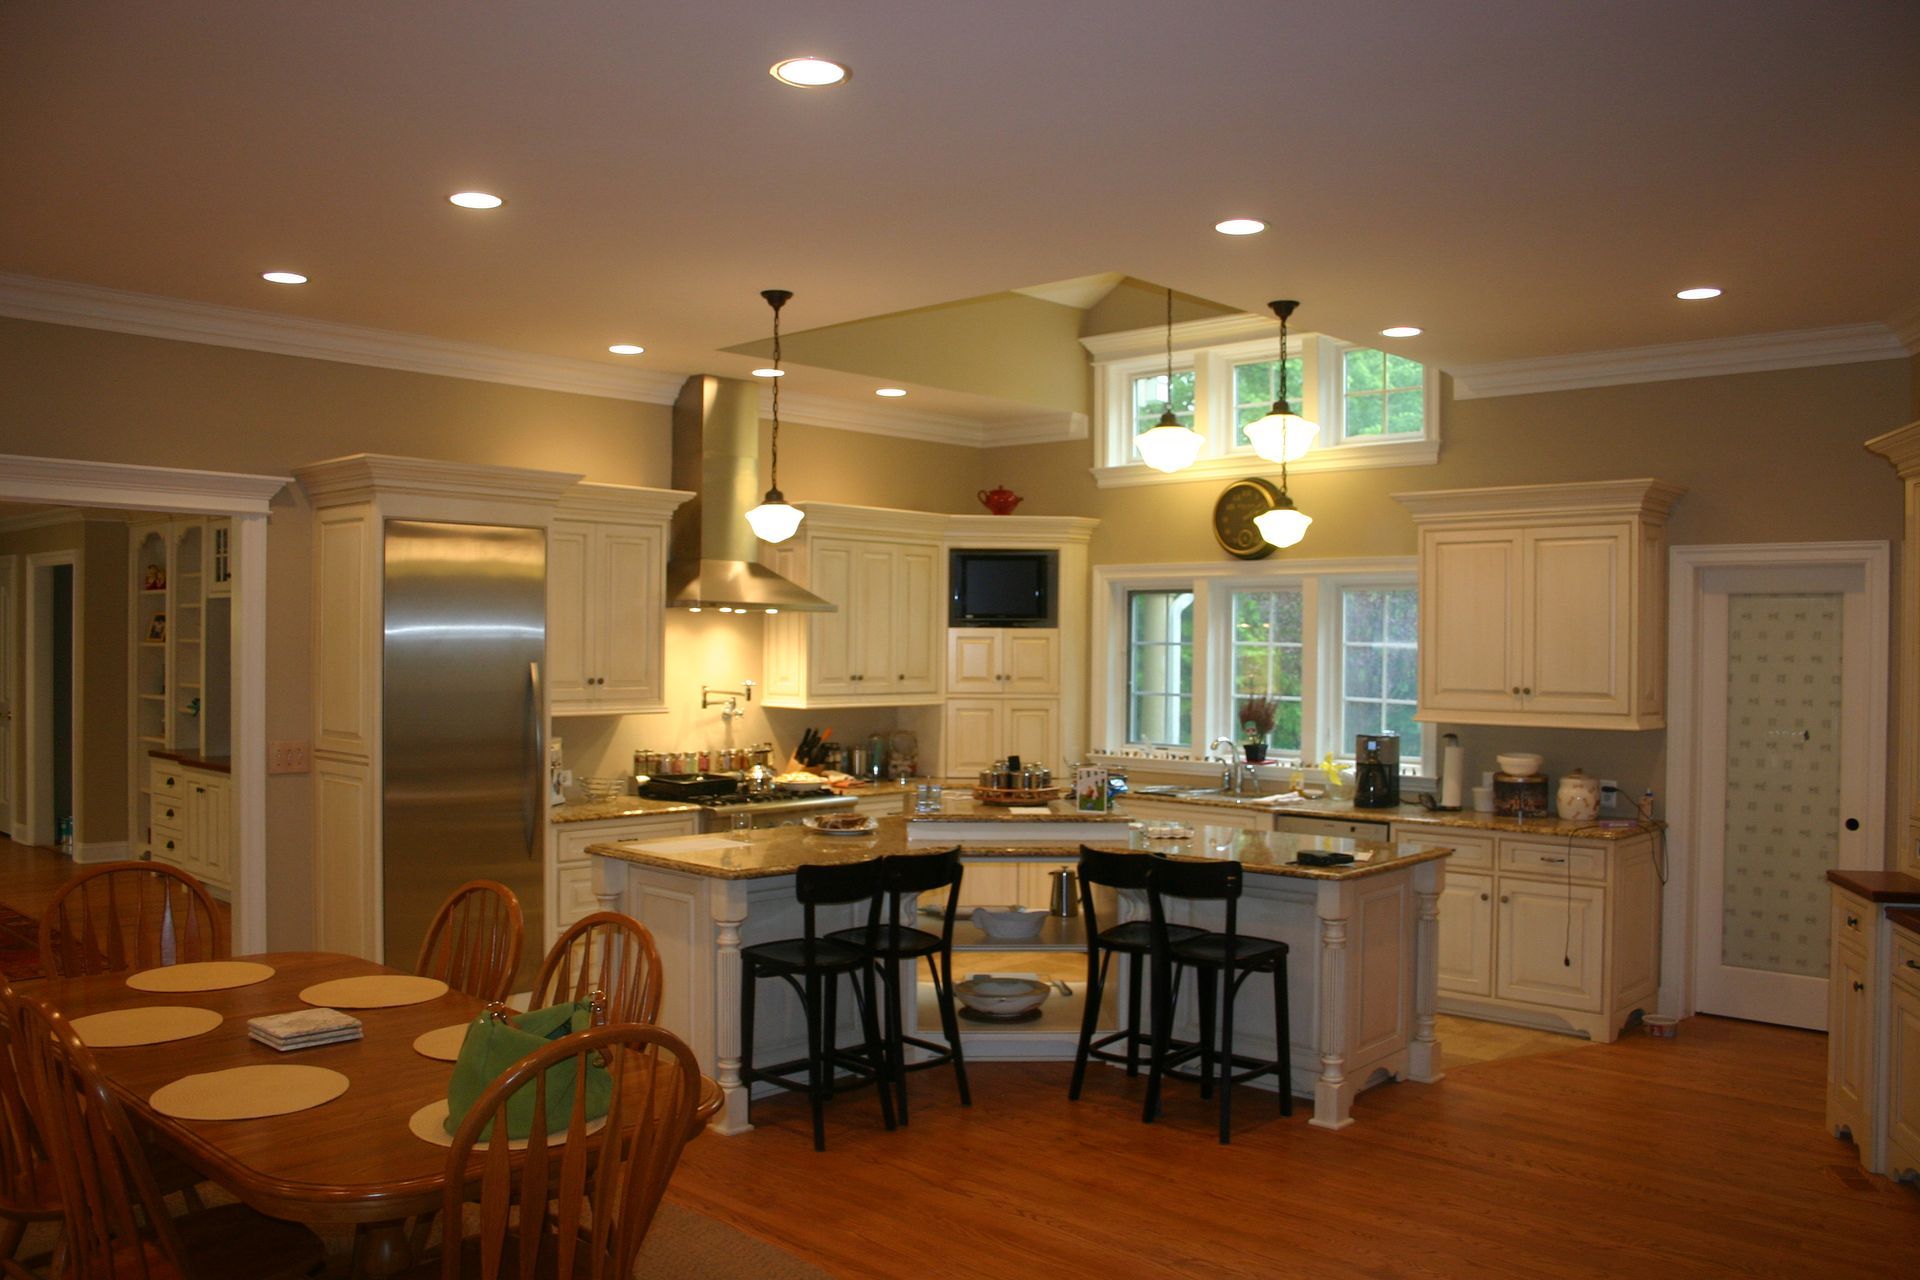 A large kitchen with white cabinets and stainless steel appliances